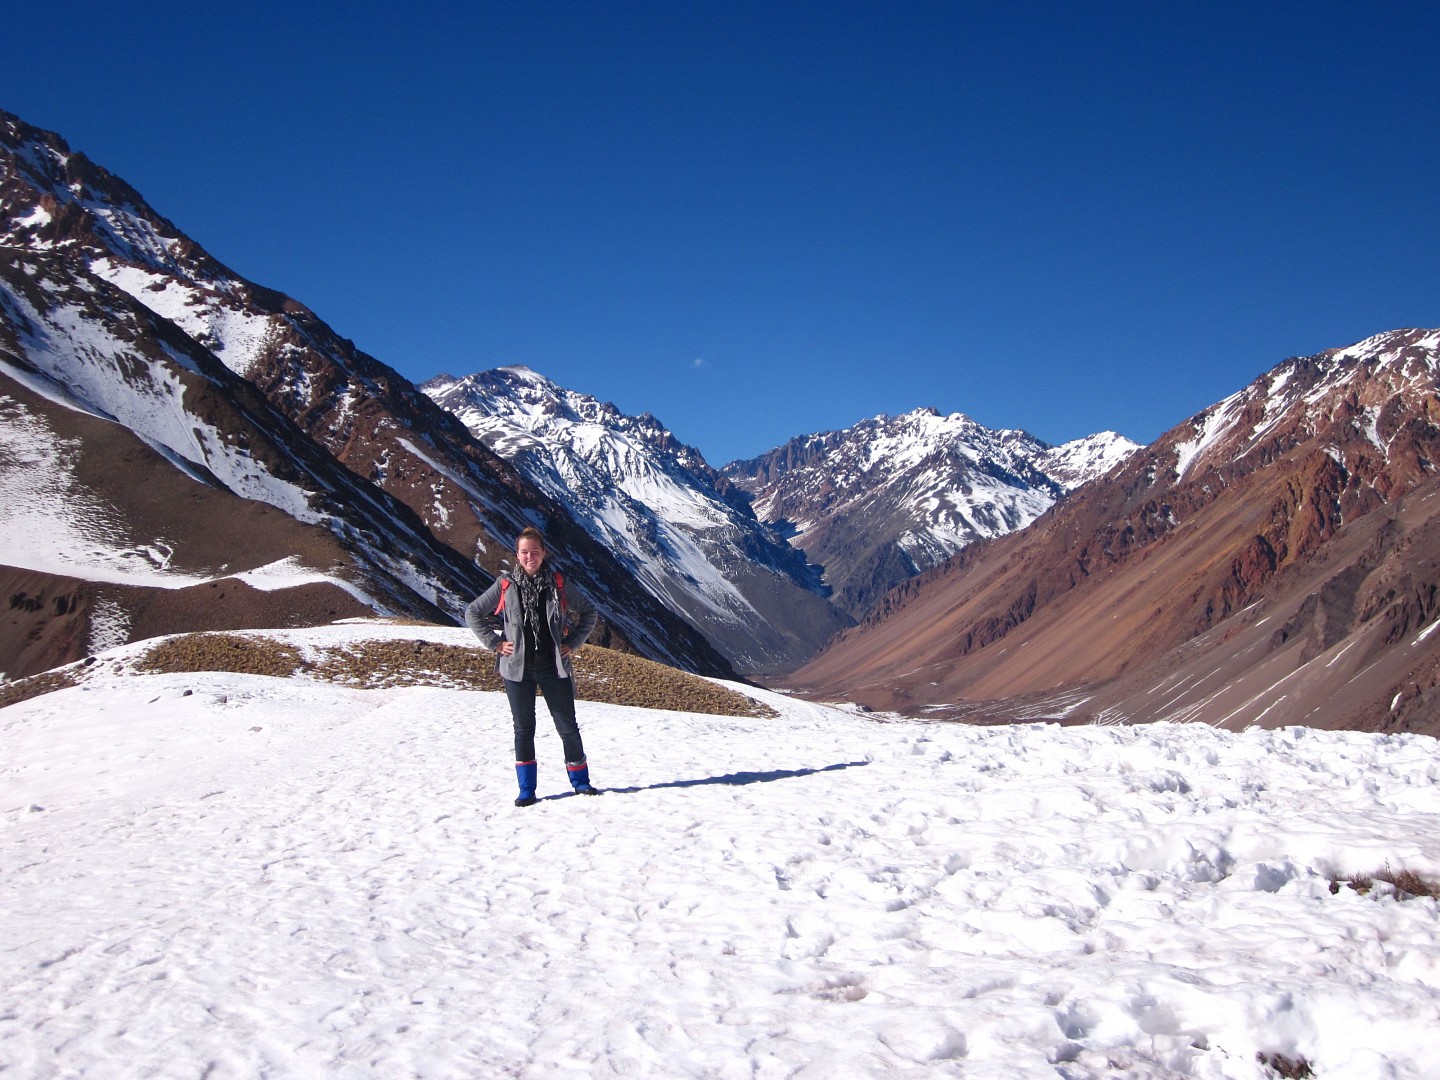 student on snow-covered slope with mountain range in background